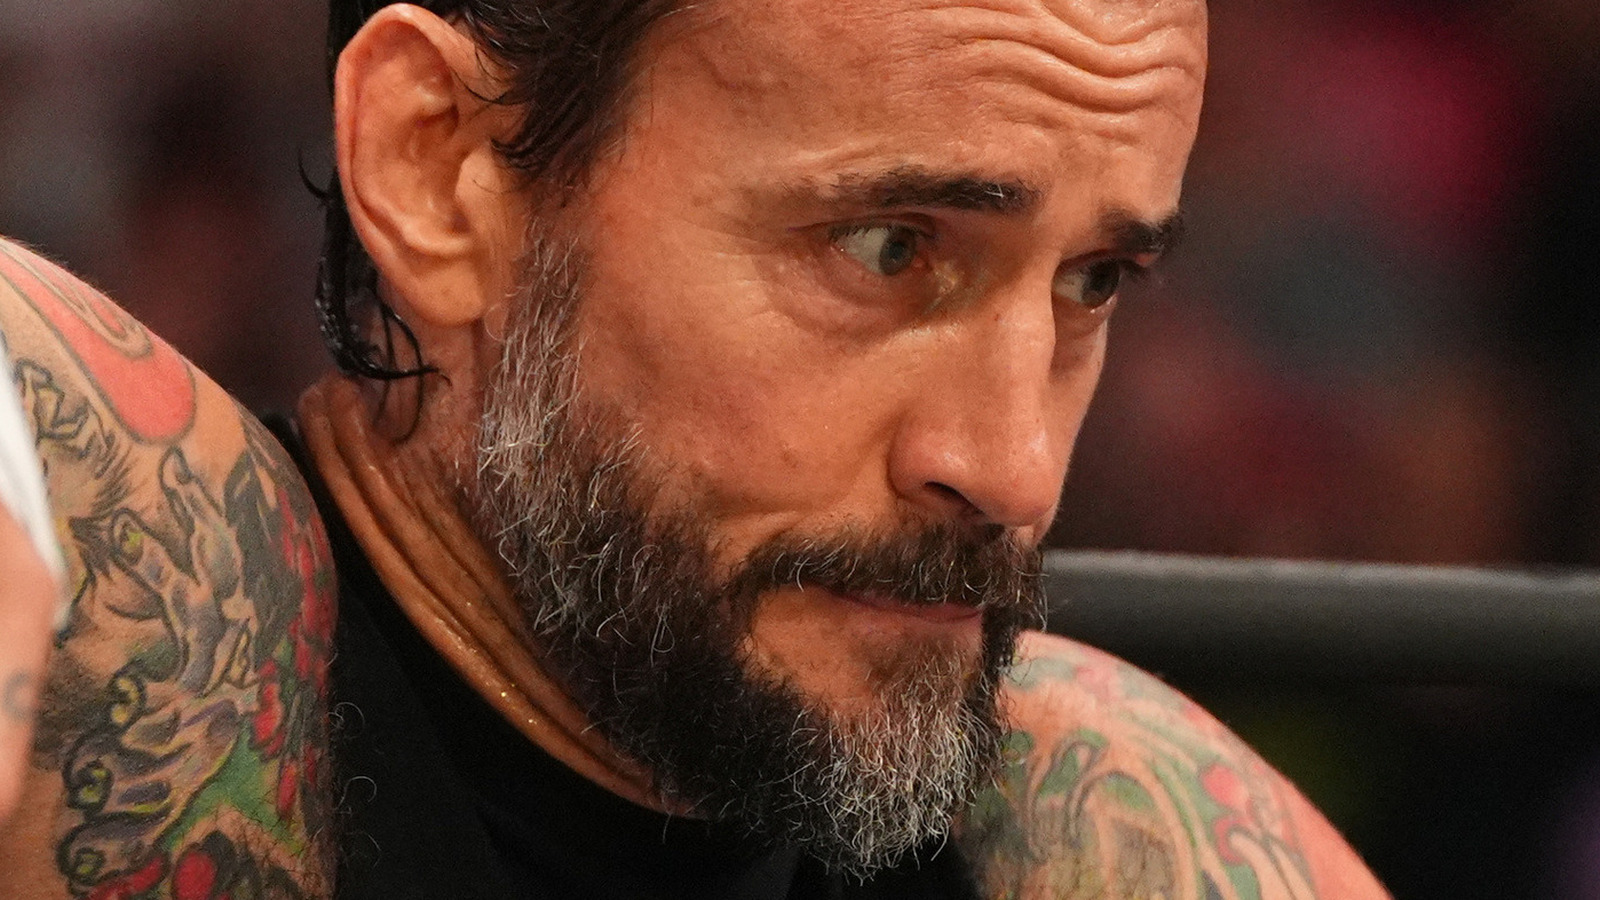 CM Punk Takes Shot At Fellow AEW Star Hangman Adam Page In Post-Collision Promo